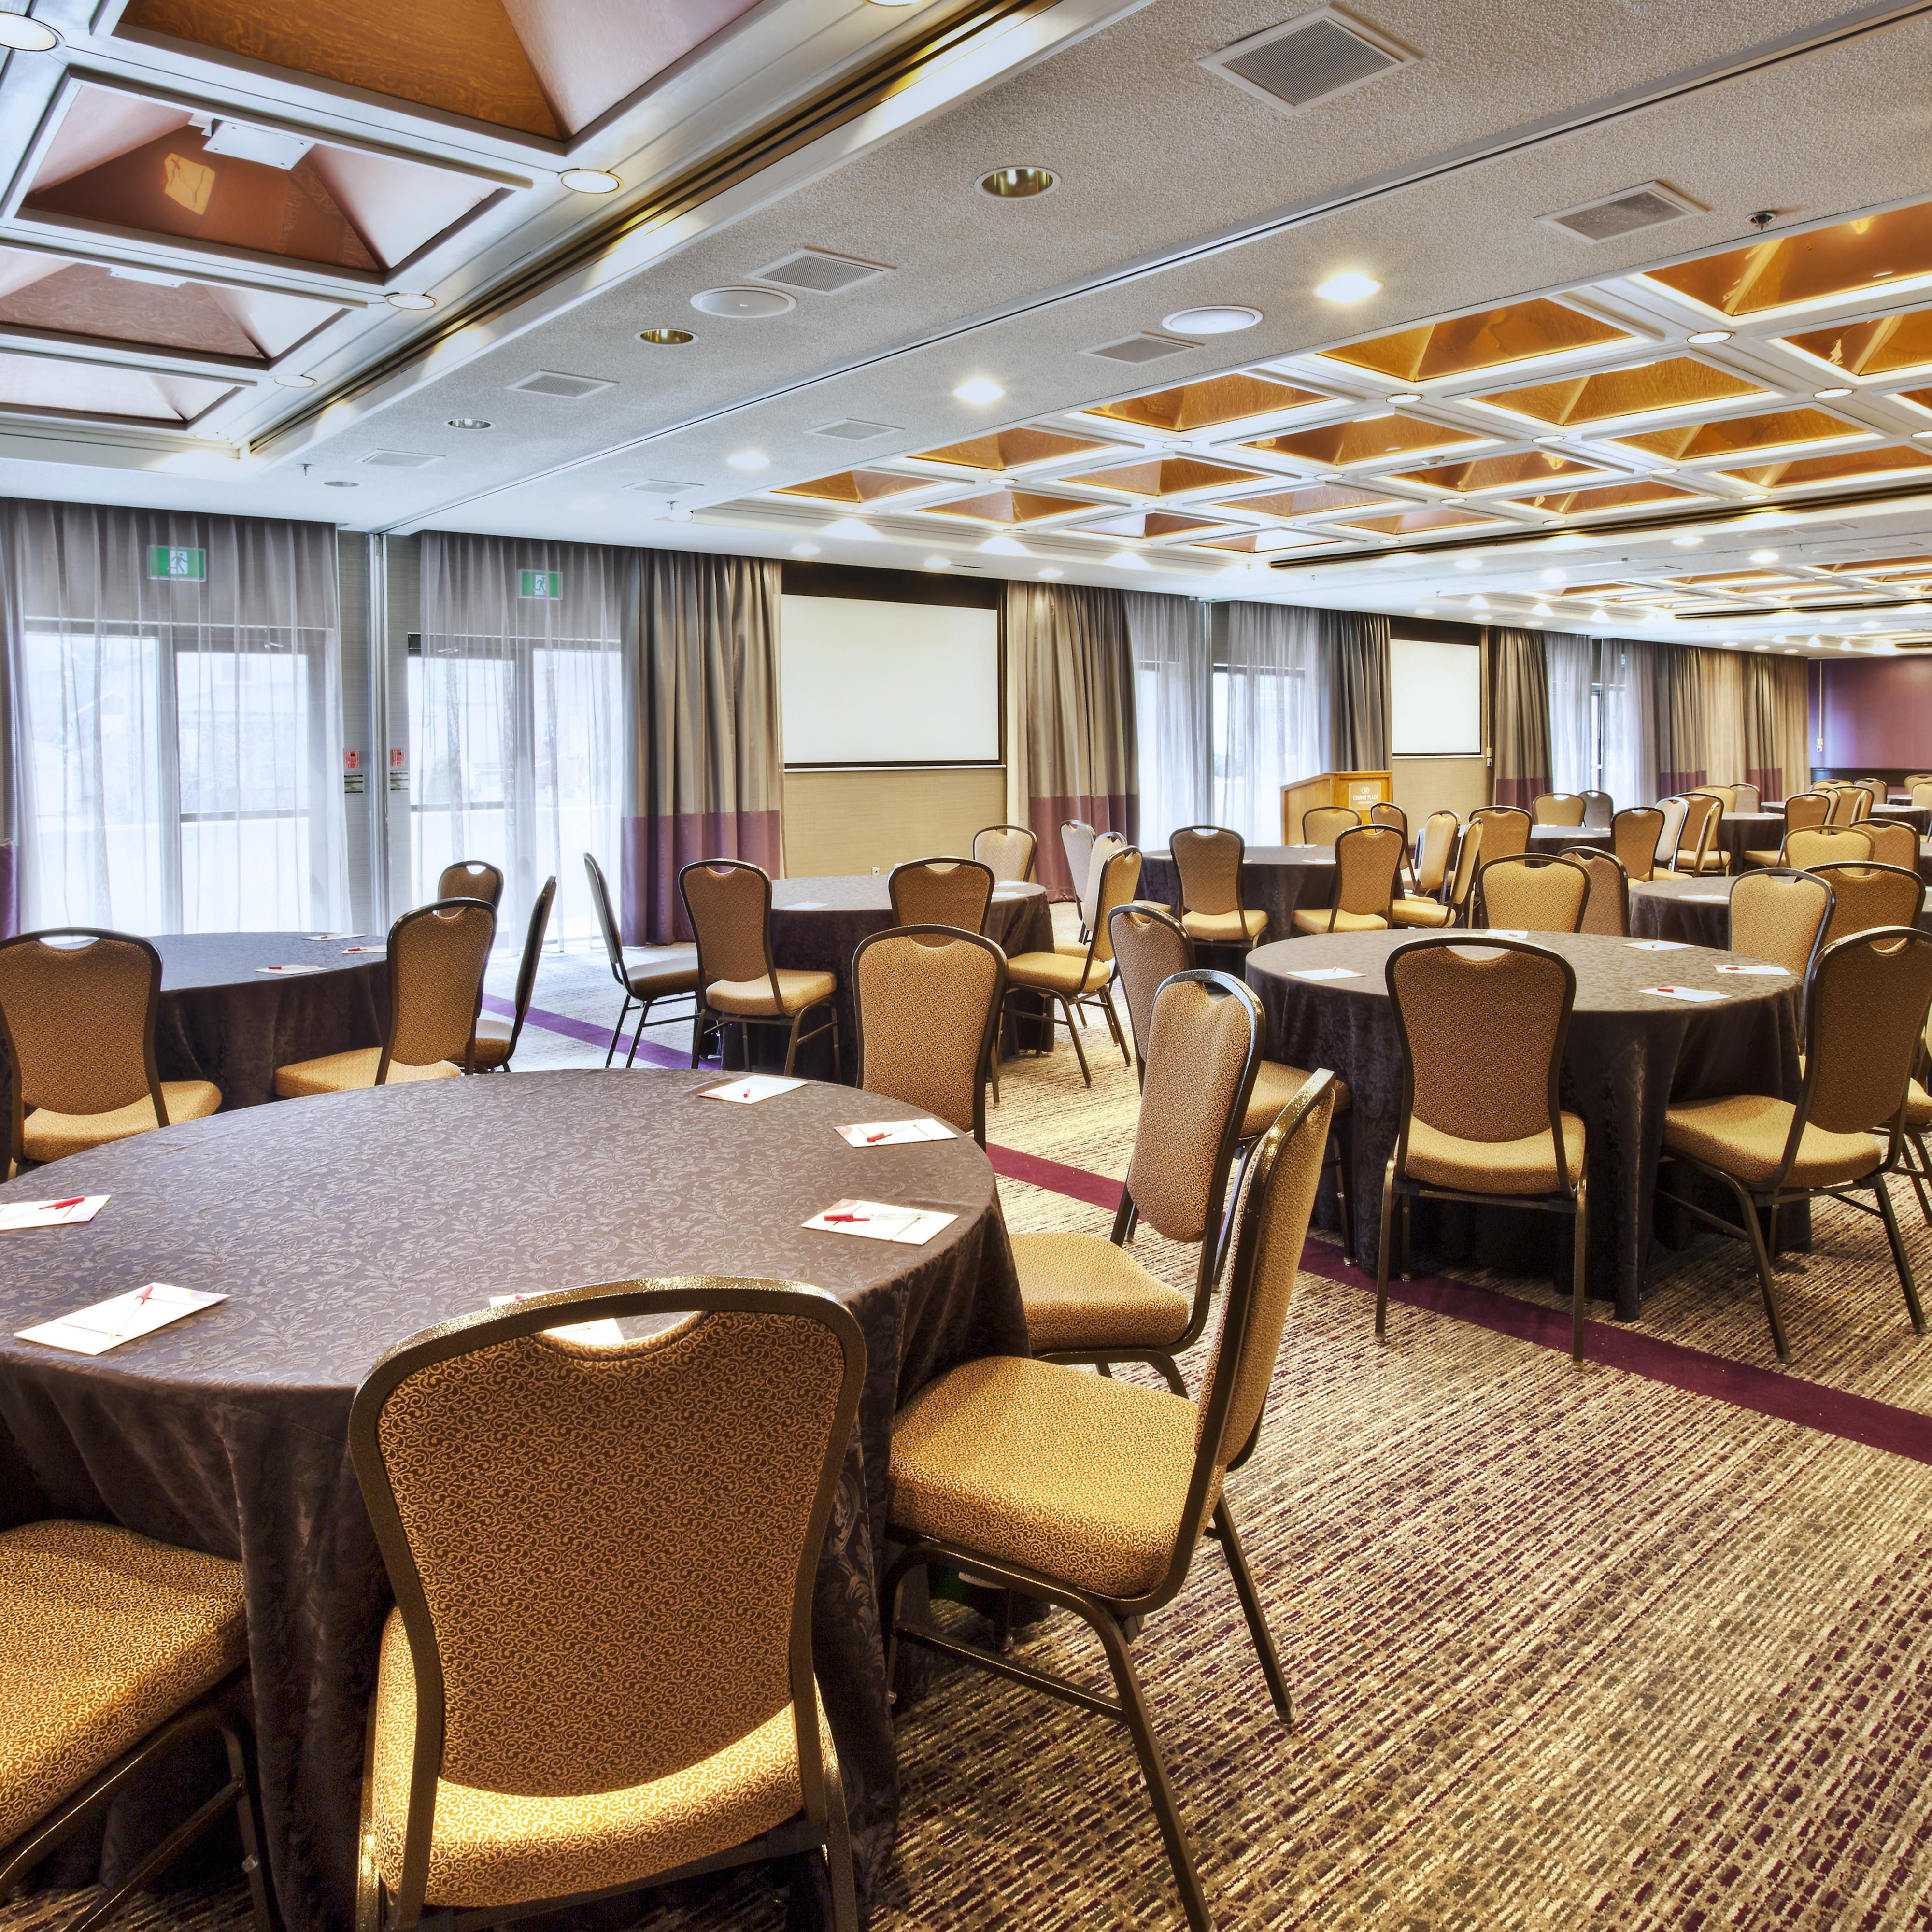 Hold your next event in one of our flexible meeting spaces